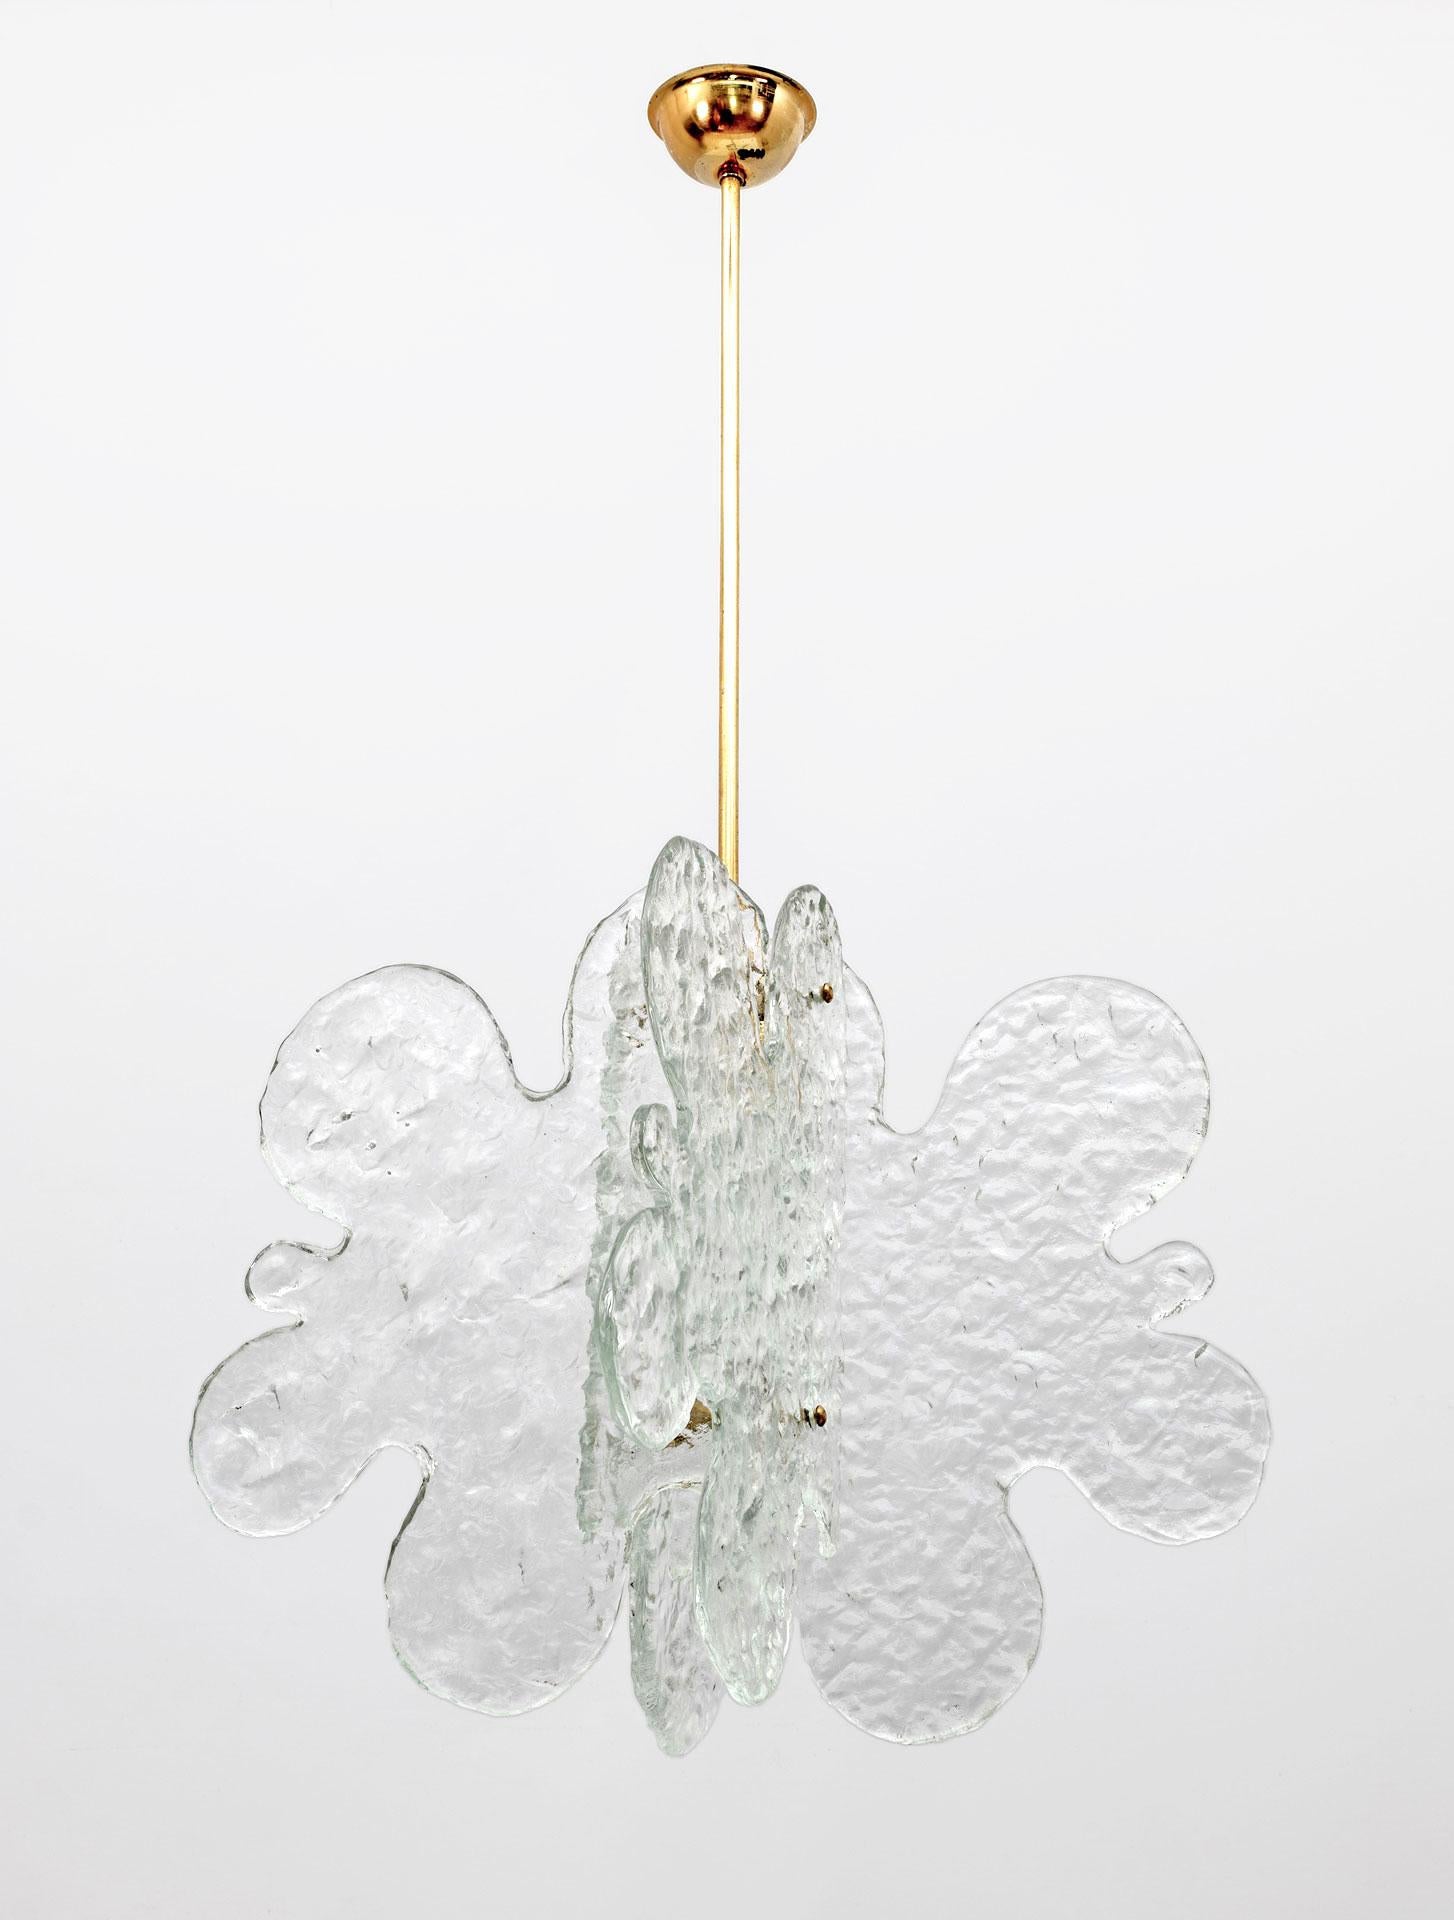 Murano glass chandelier designed by Carlo Nason and made by Mazzega in the 1970s characterized by four cloud-shaped and structured glass sheets joined by a central brass frame. The length of the stem can be adjusted as needed.
The suspension is